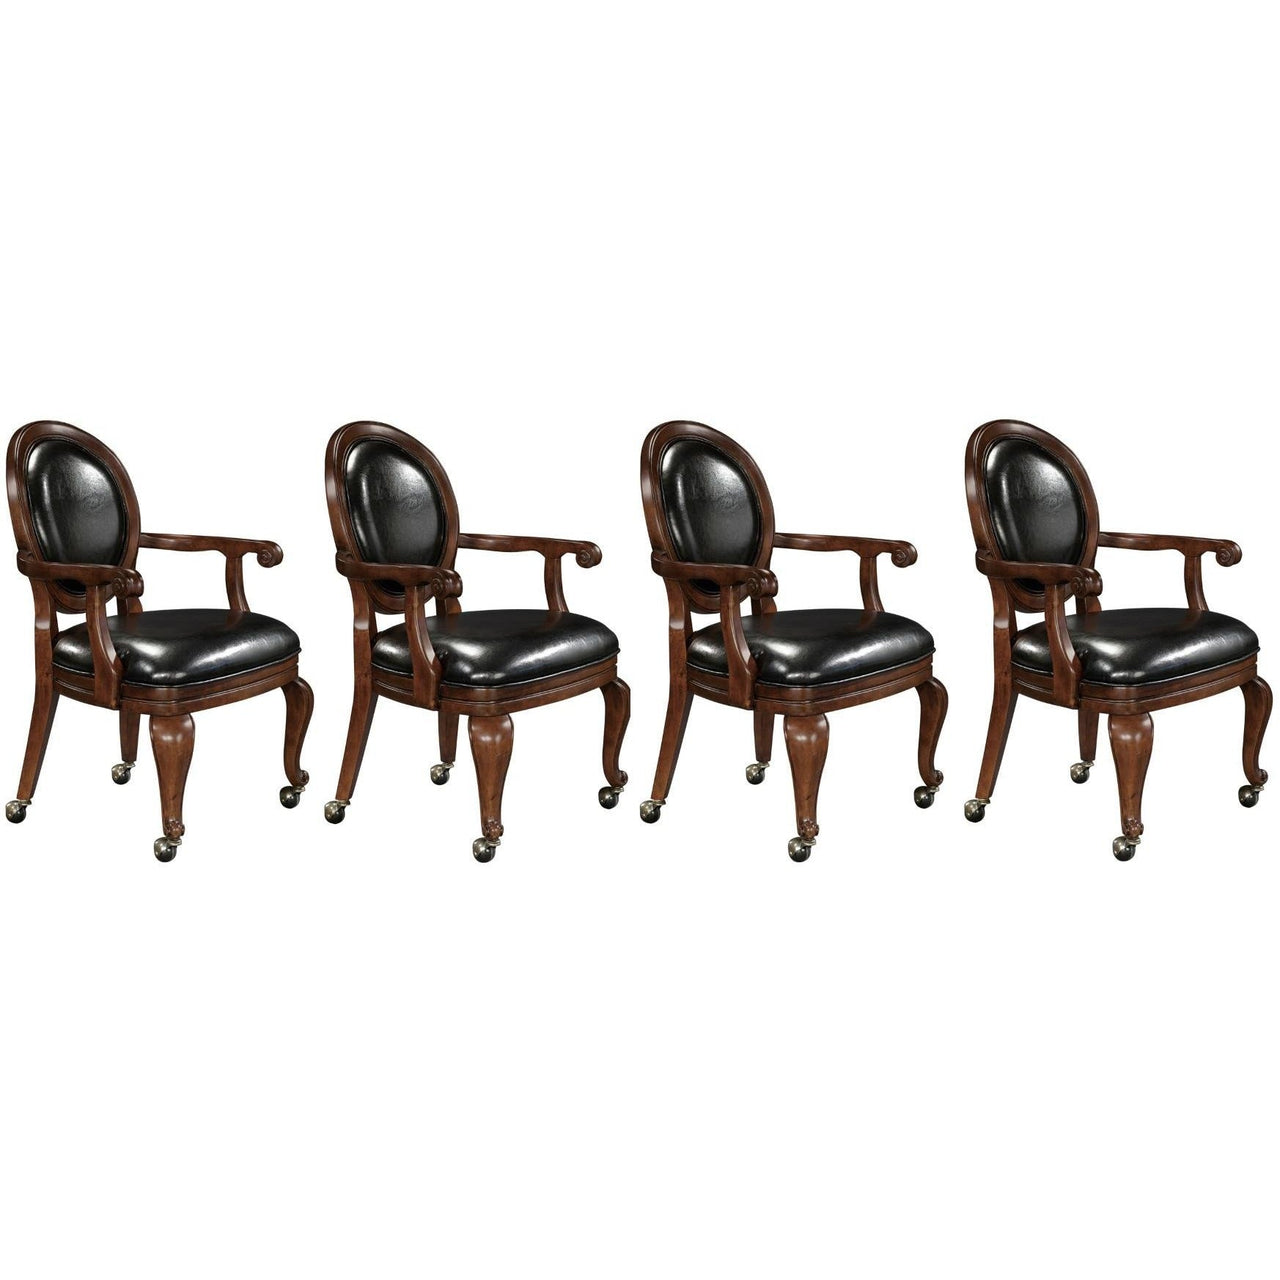 Set of Four (4) or Six (6) Niagara Club Chairs by Howard Miller-AMERICANA-POKER-TABLES